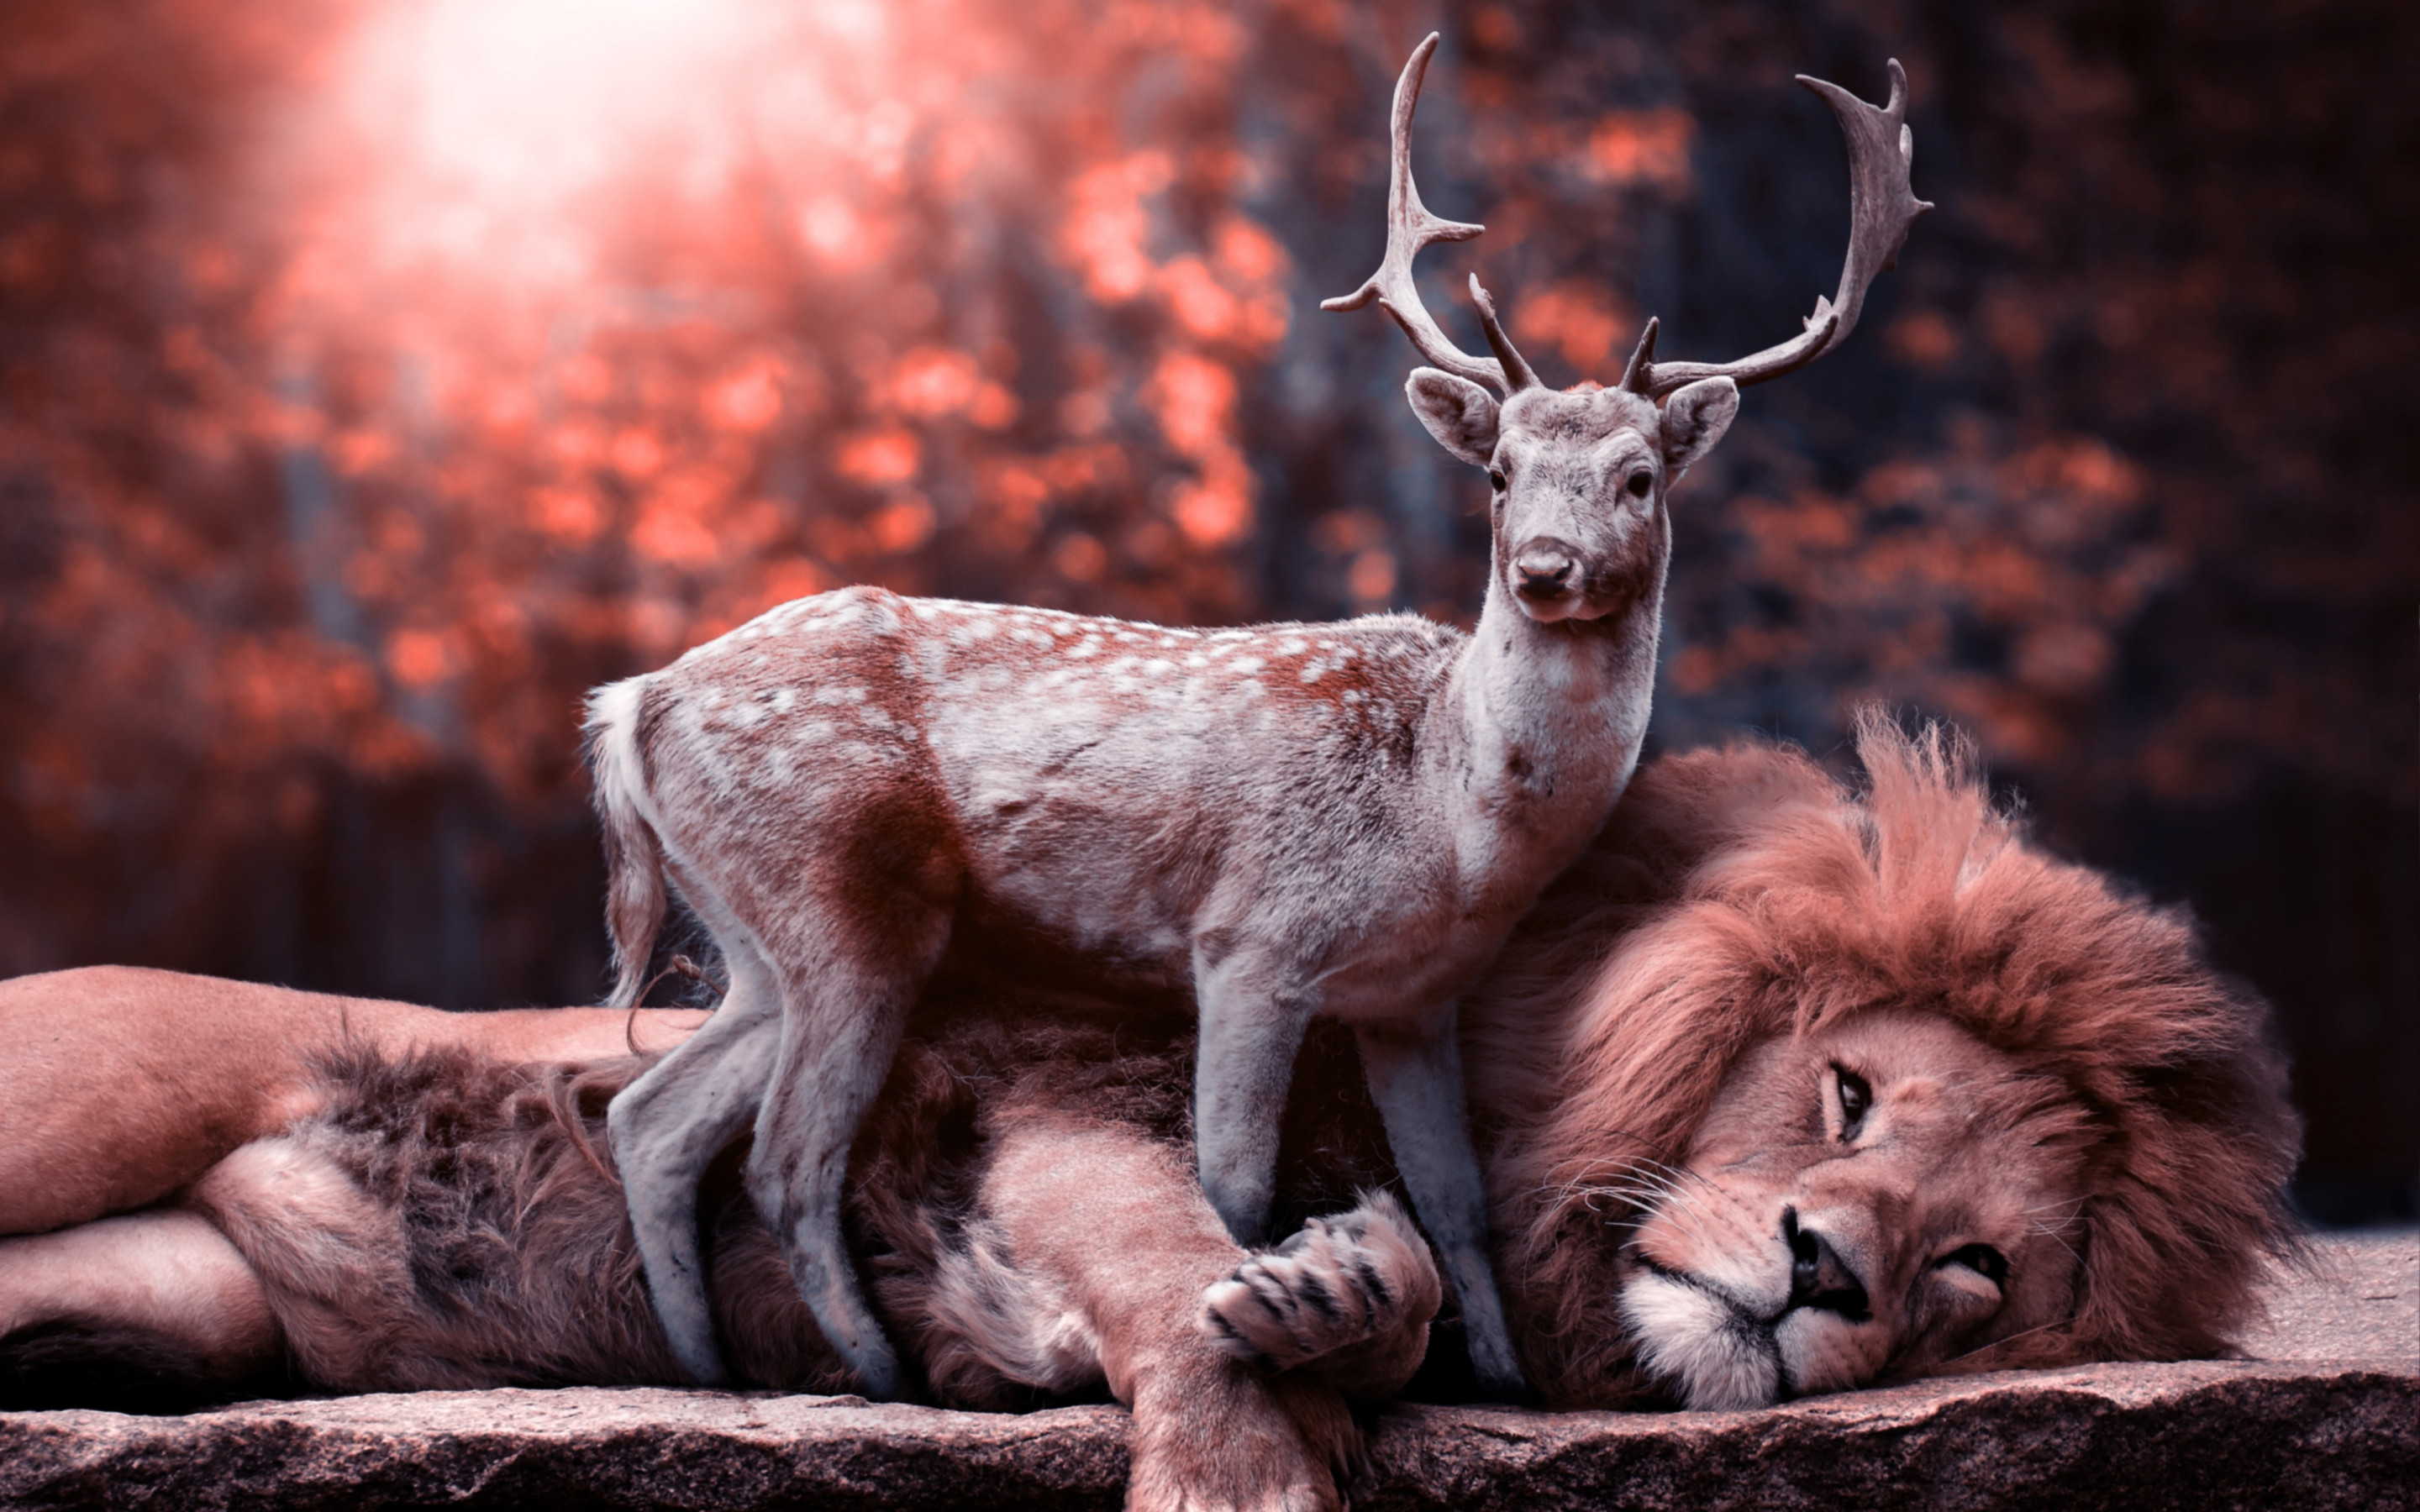 The lion and the deer wallpaper 2880x1800